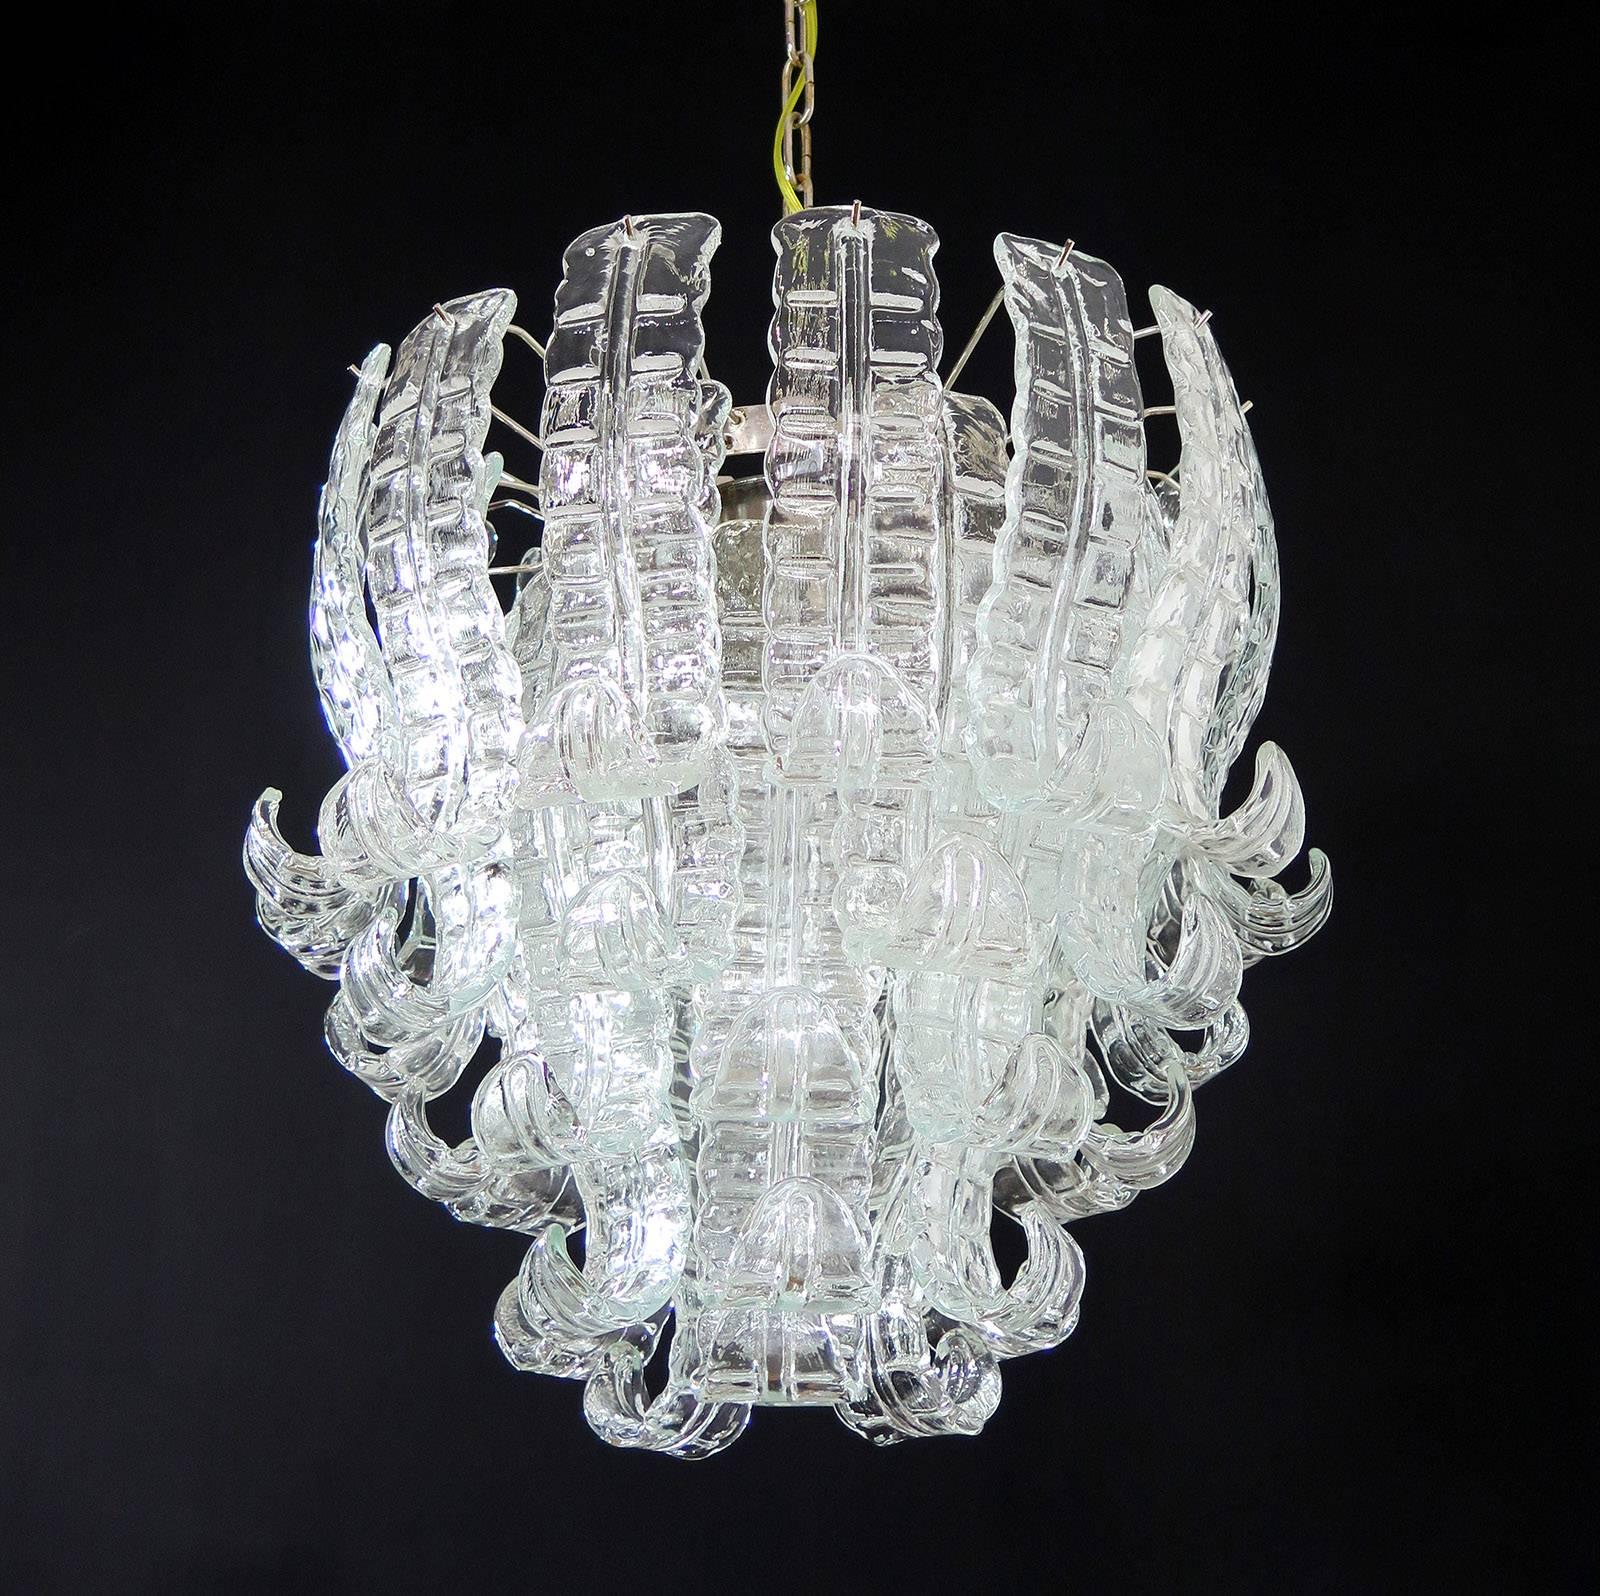 Beautiful and huge Italian Murano chandelier composed of 41 splendid transparent glasses that give a very elegant look

Period 1970s

Dimensions: 48.40 inches (123 cm) height with chain; 21.65 inches (55 cm) height without chain; 22.45 inches